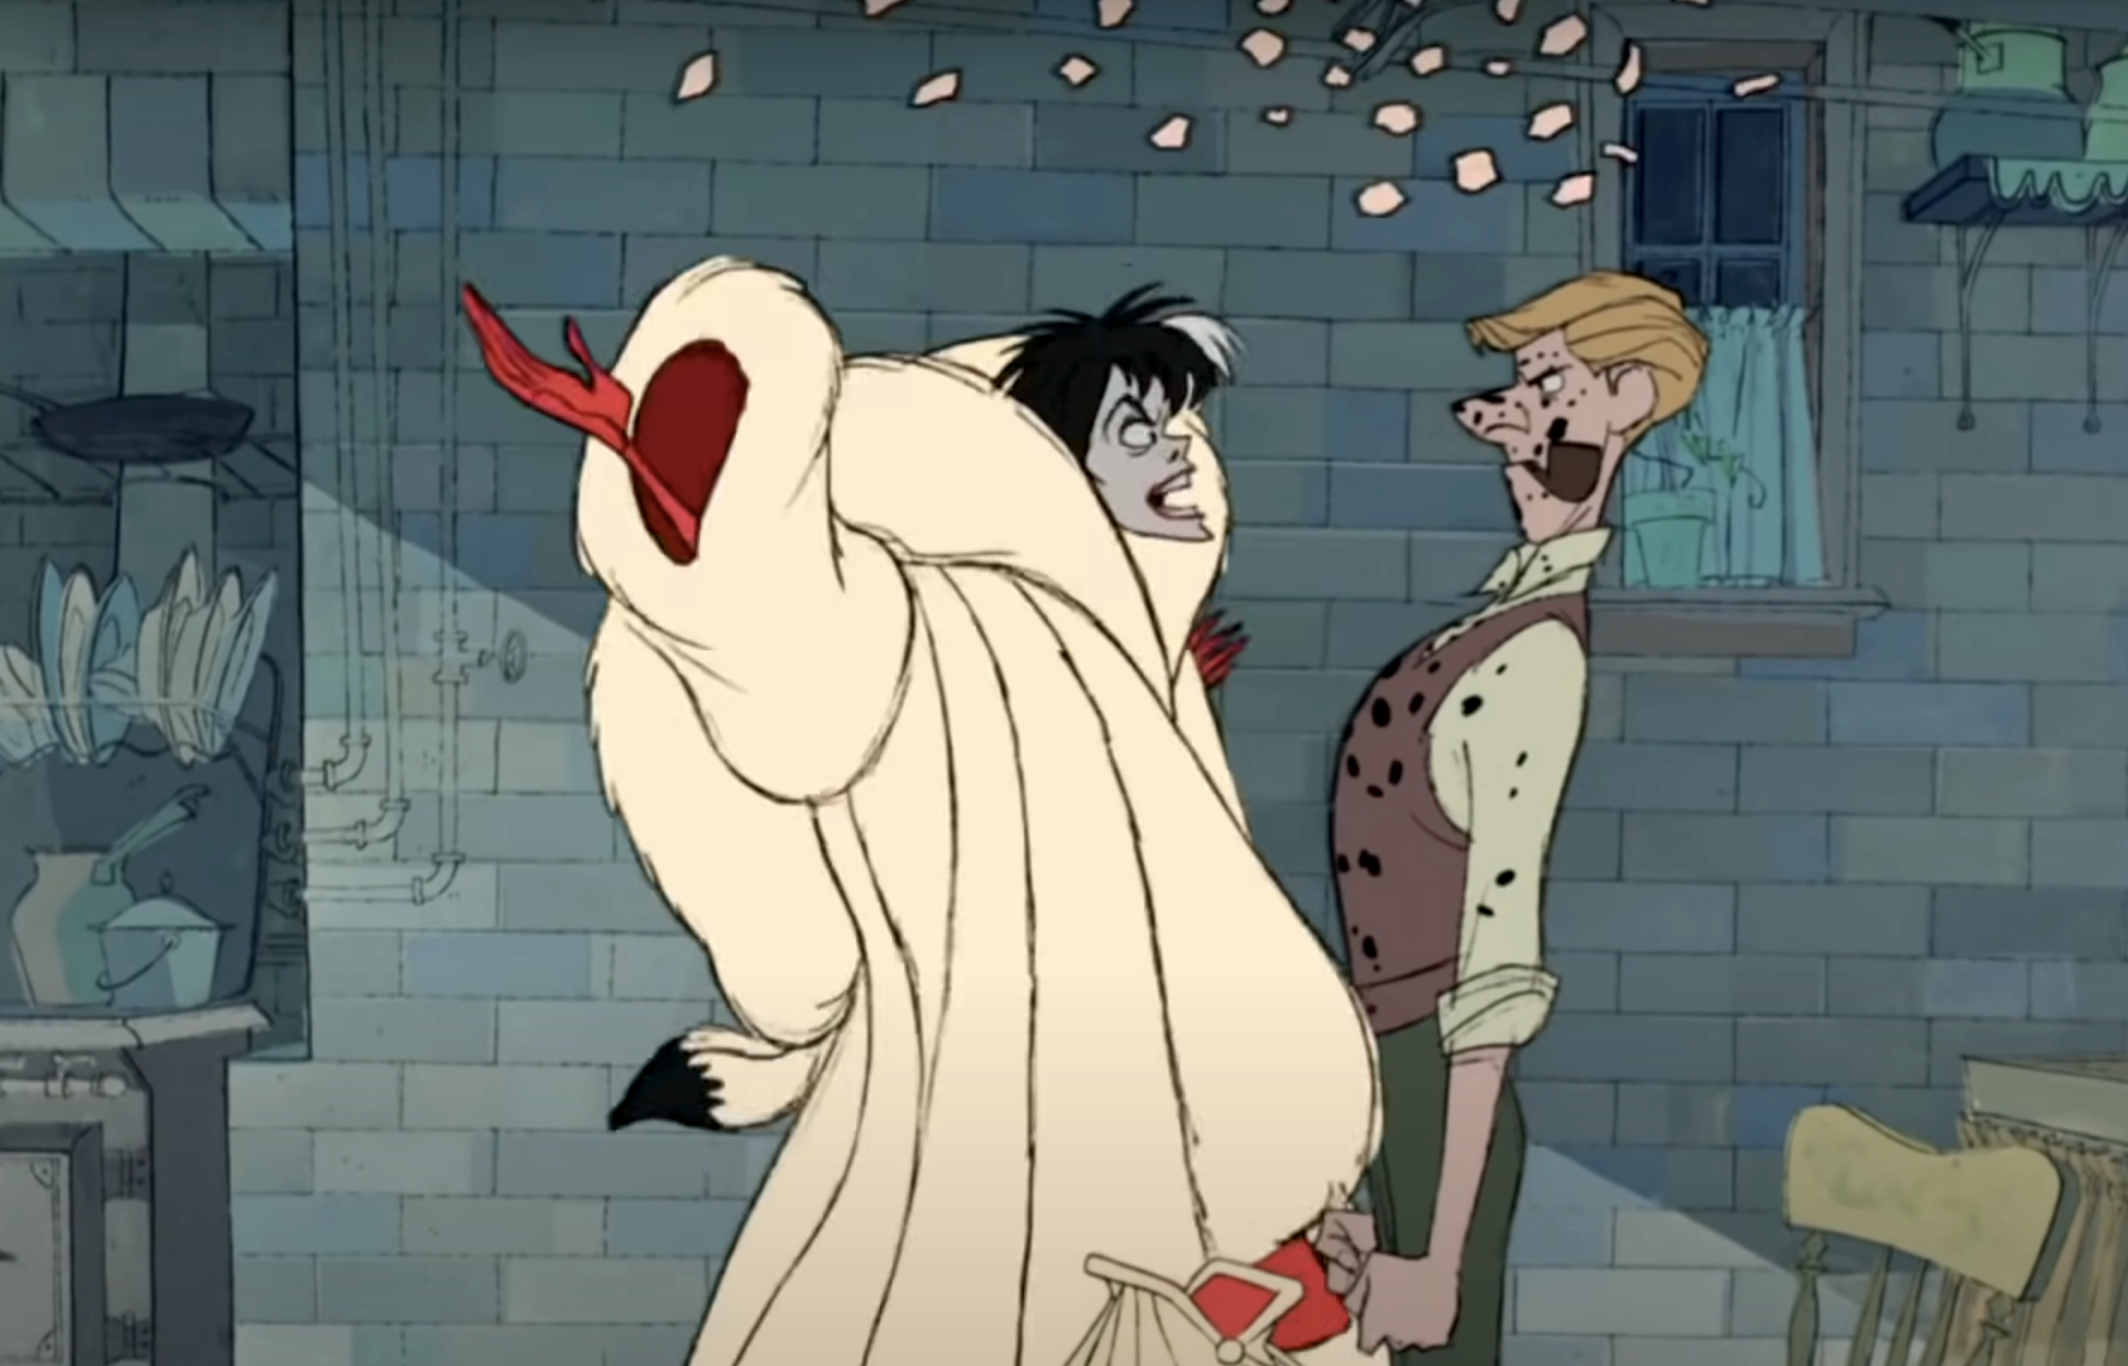 Cruella yelling at a man as the check pieces fall to the ground